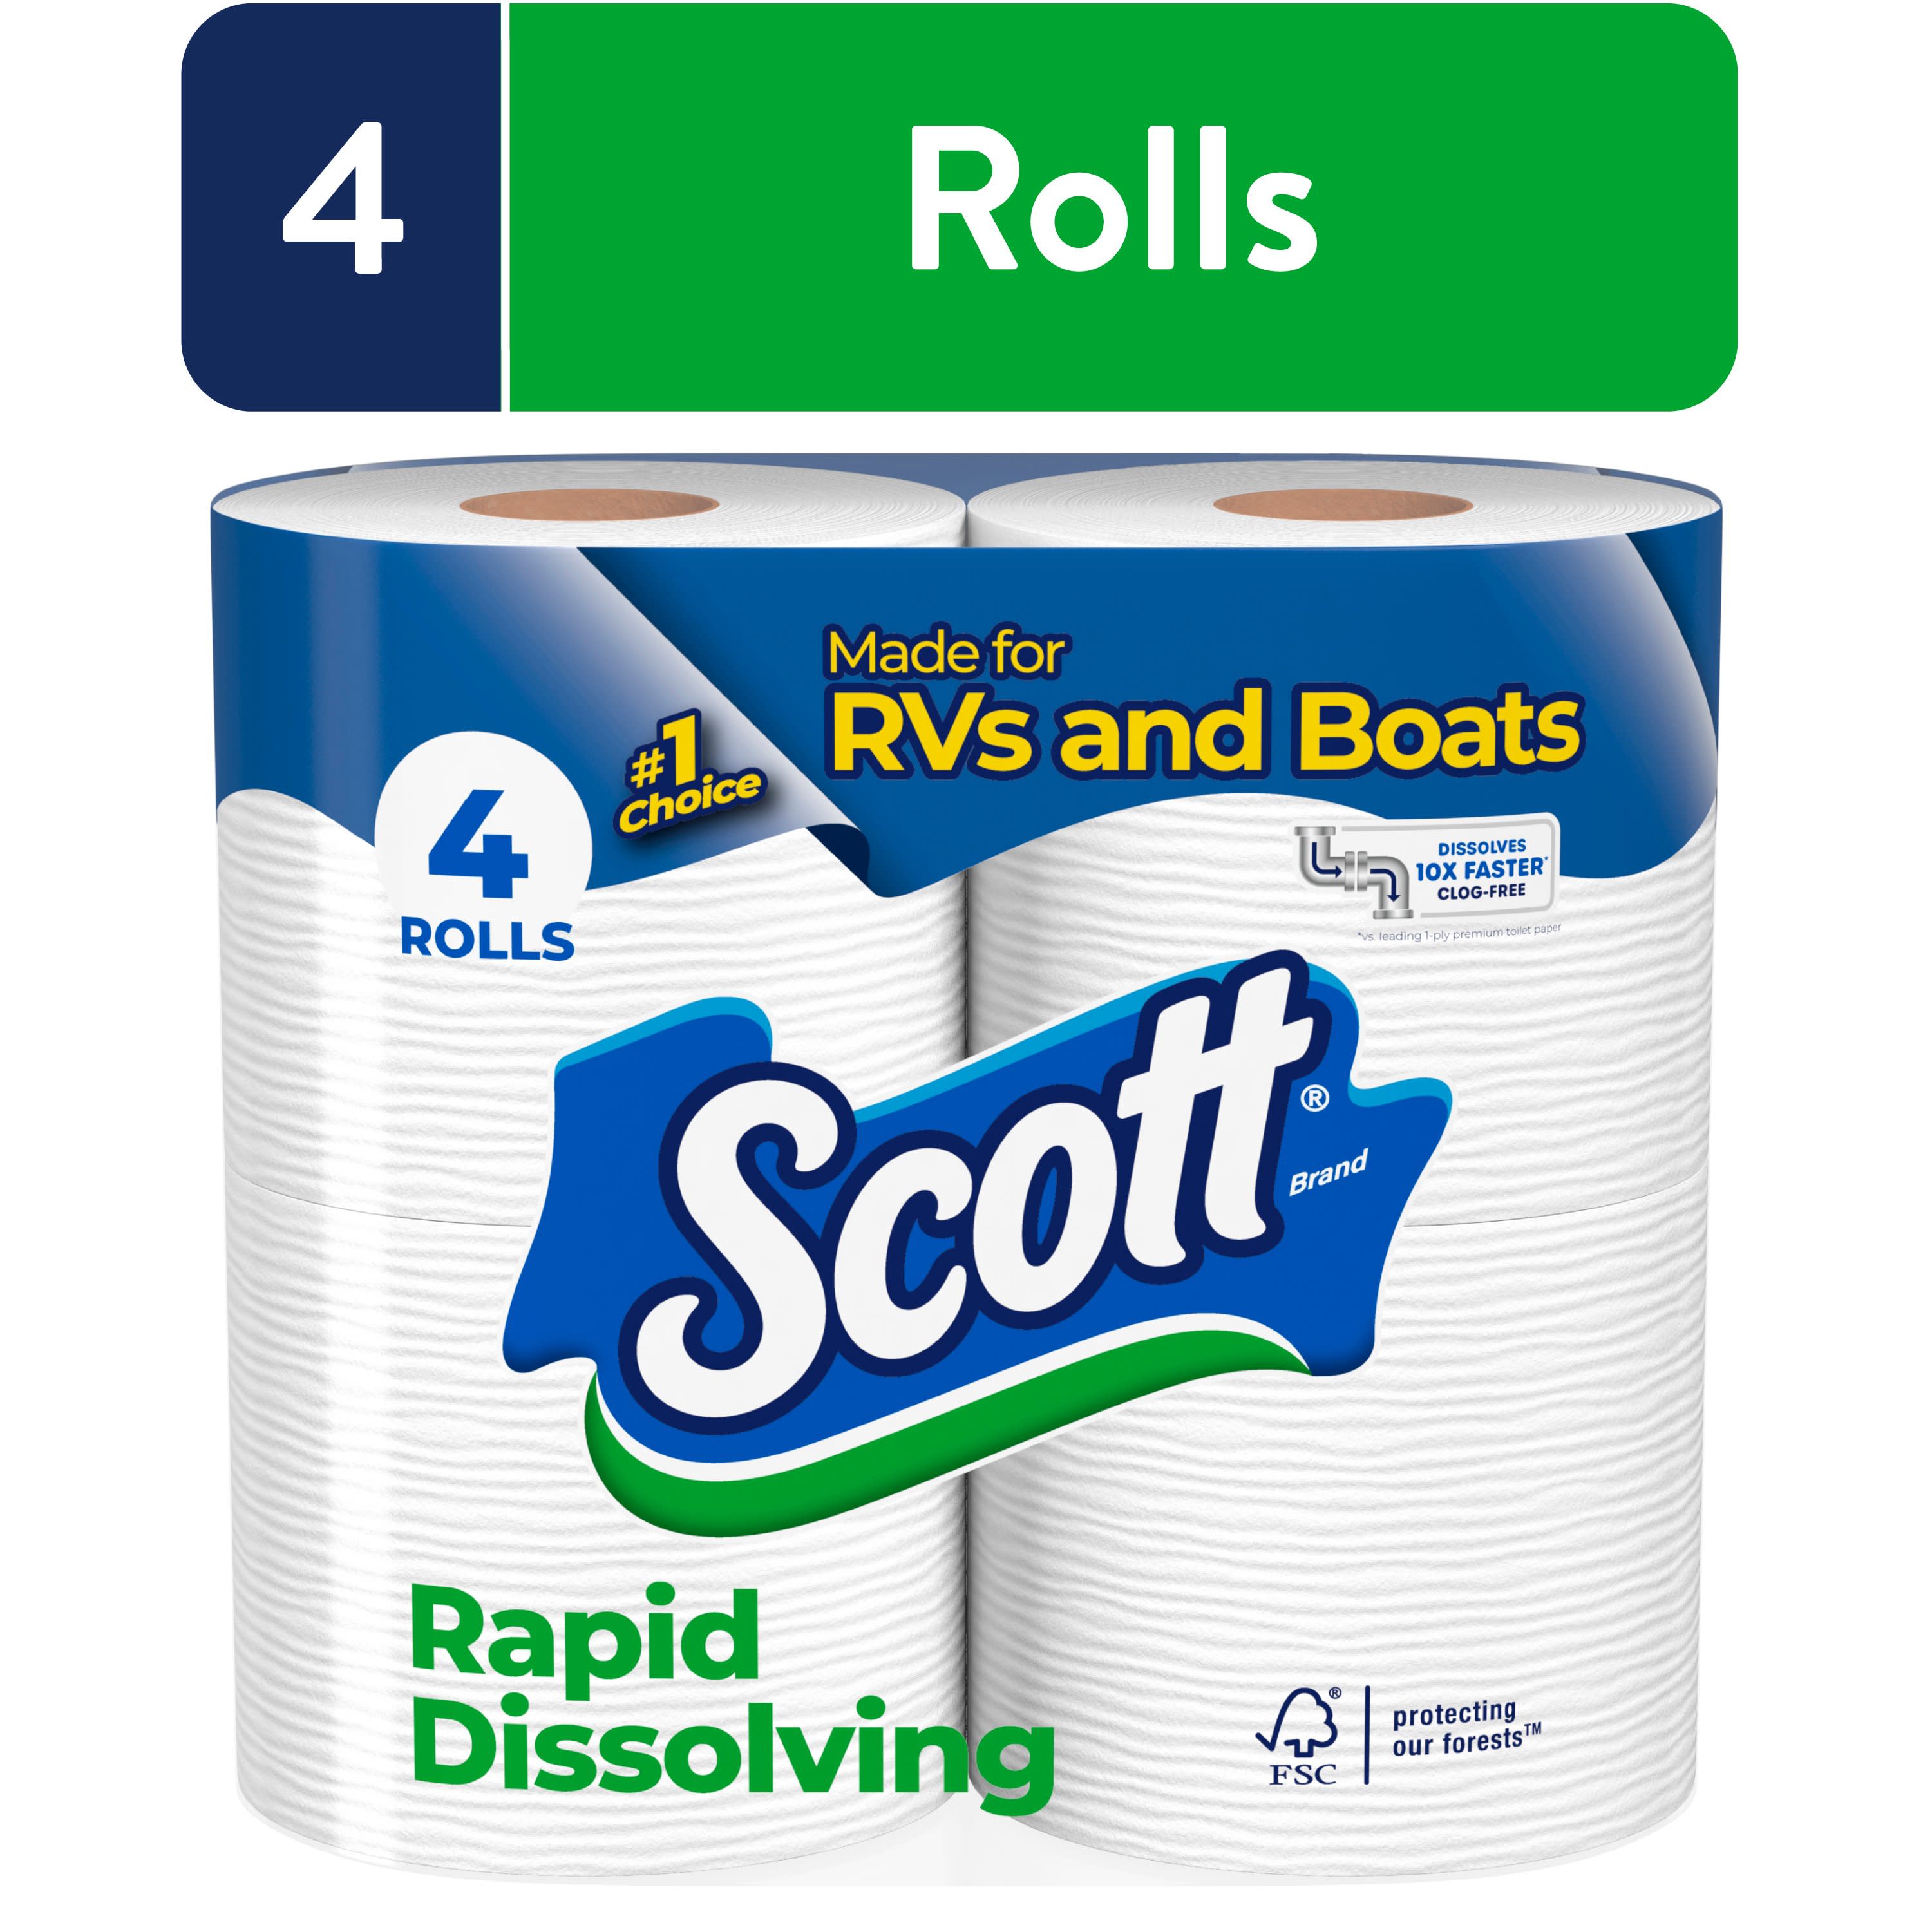 Scott Rapid-Dissolving Toilet Paper for RVs & Boats, 4 Double Rolls - image 1 of 11